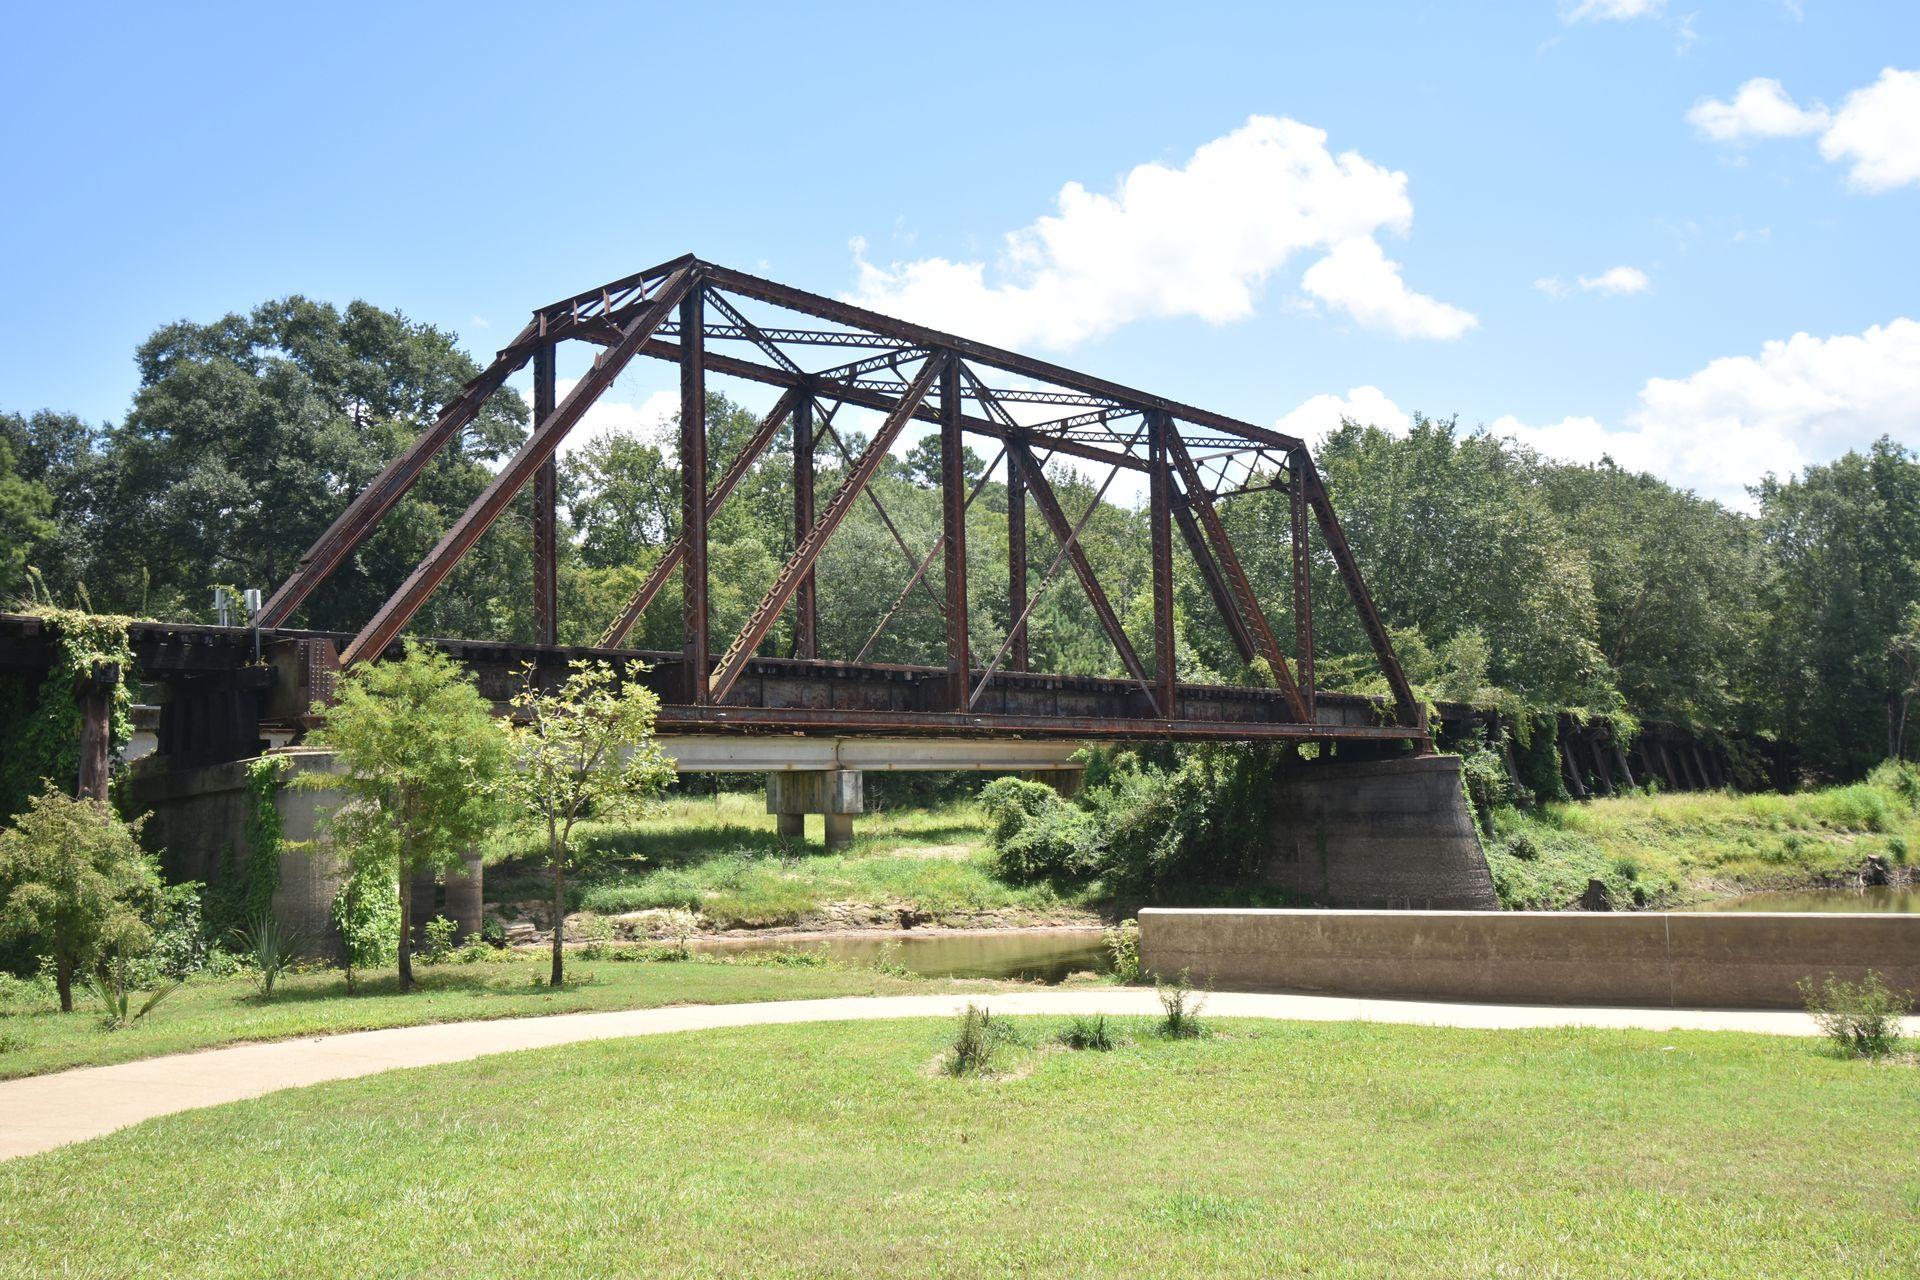 The Howe Truss Train Trestle Bridge from a short distnace away. It is surrounded by green grass and trees. At ground level below the bridge, there is a paved sidewalk.